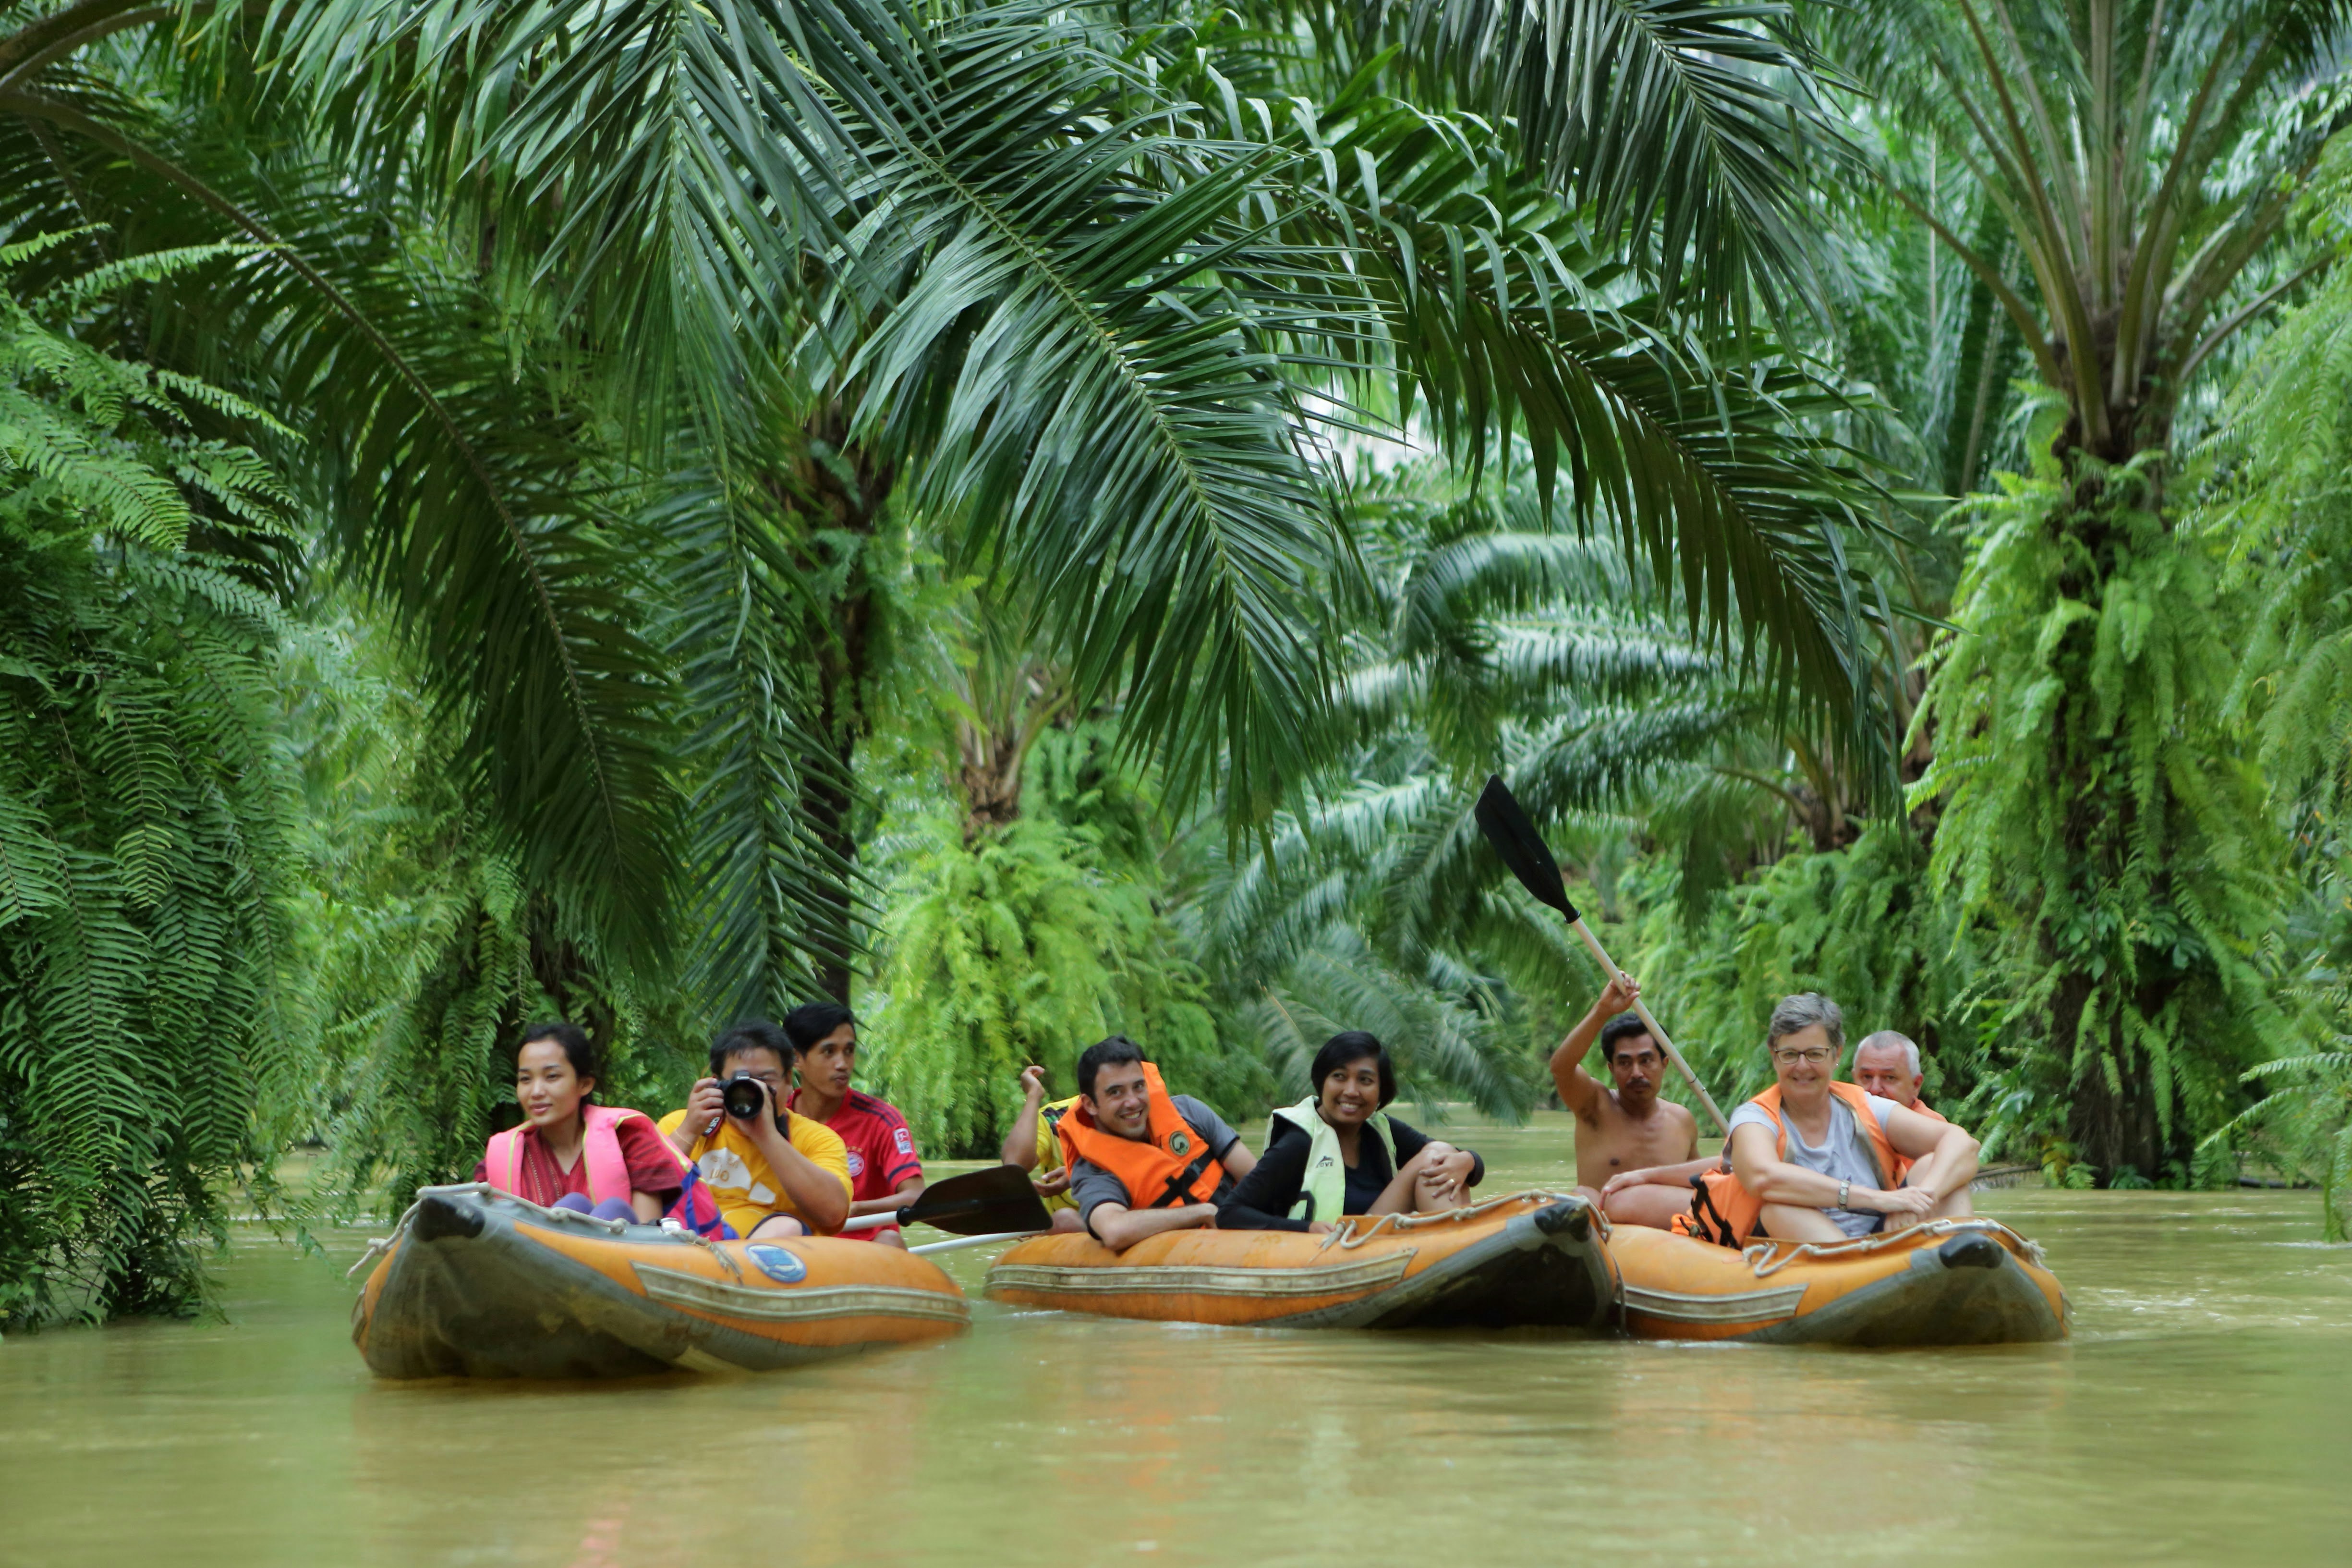 Three canoes each carrying three people sit low in the murky water in river flowing through a dense jungle